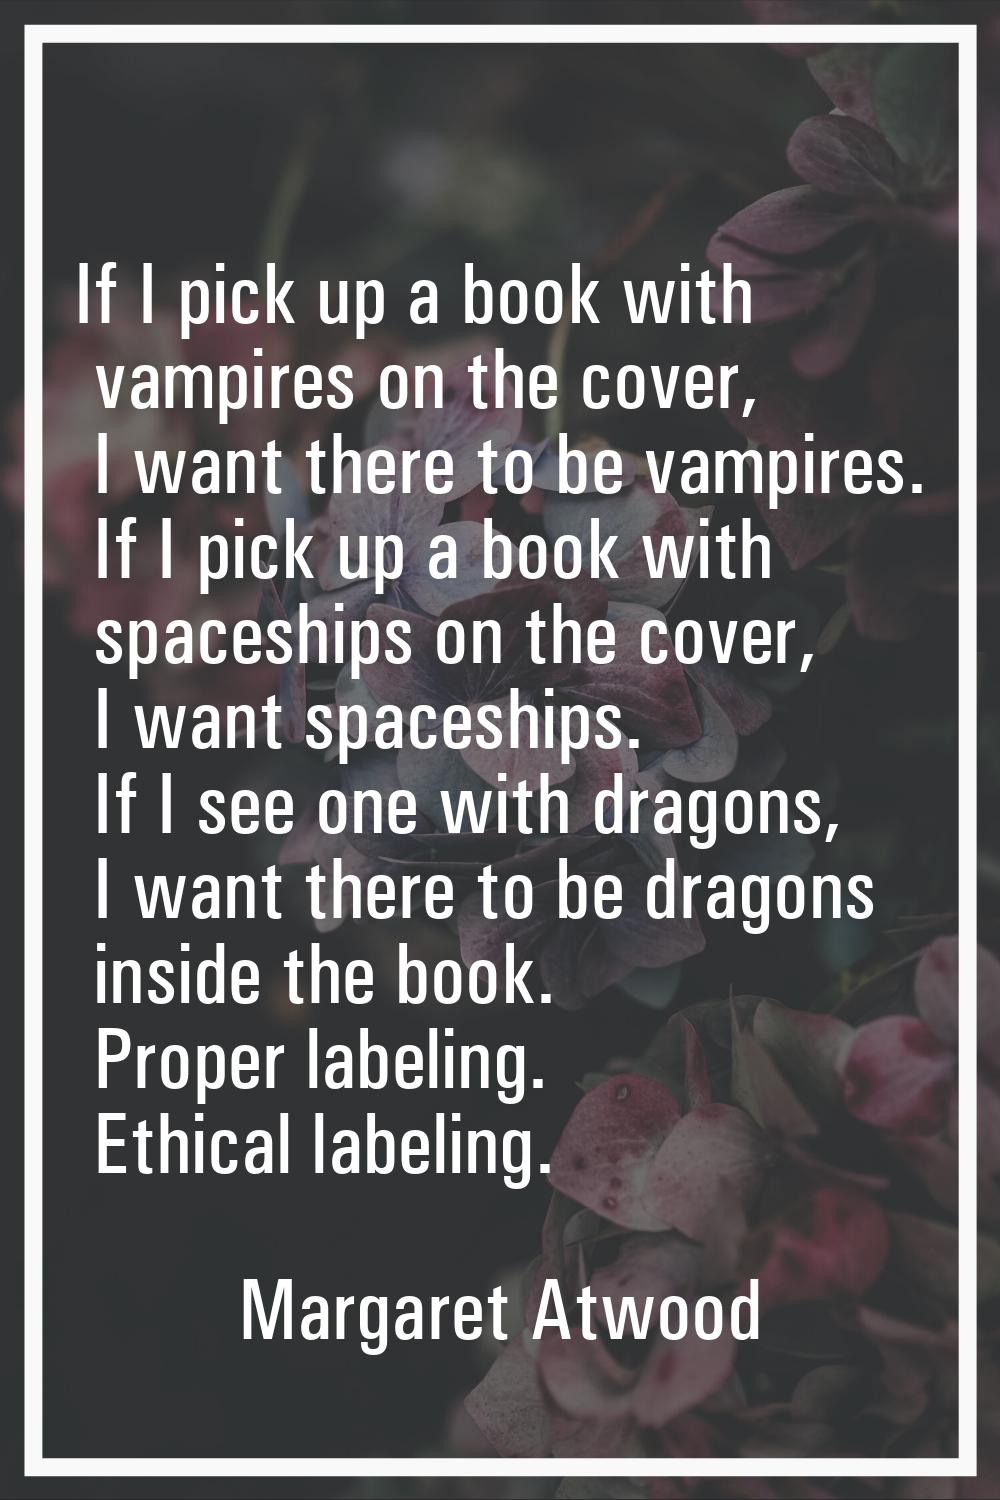 If I pick up a book with vampires on the cover, I want there to be vampires. If I pick up a book wi